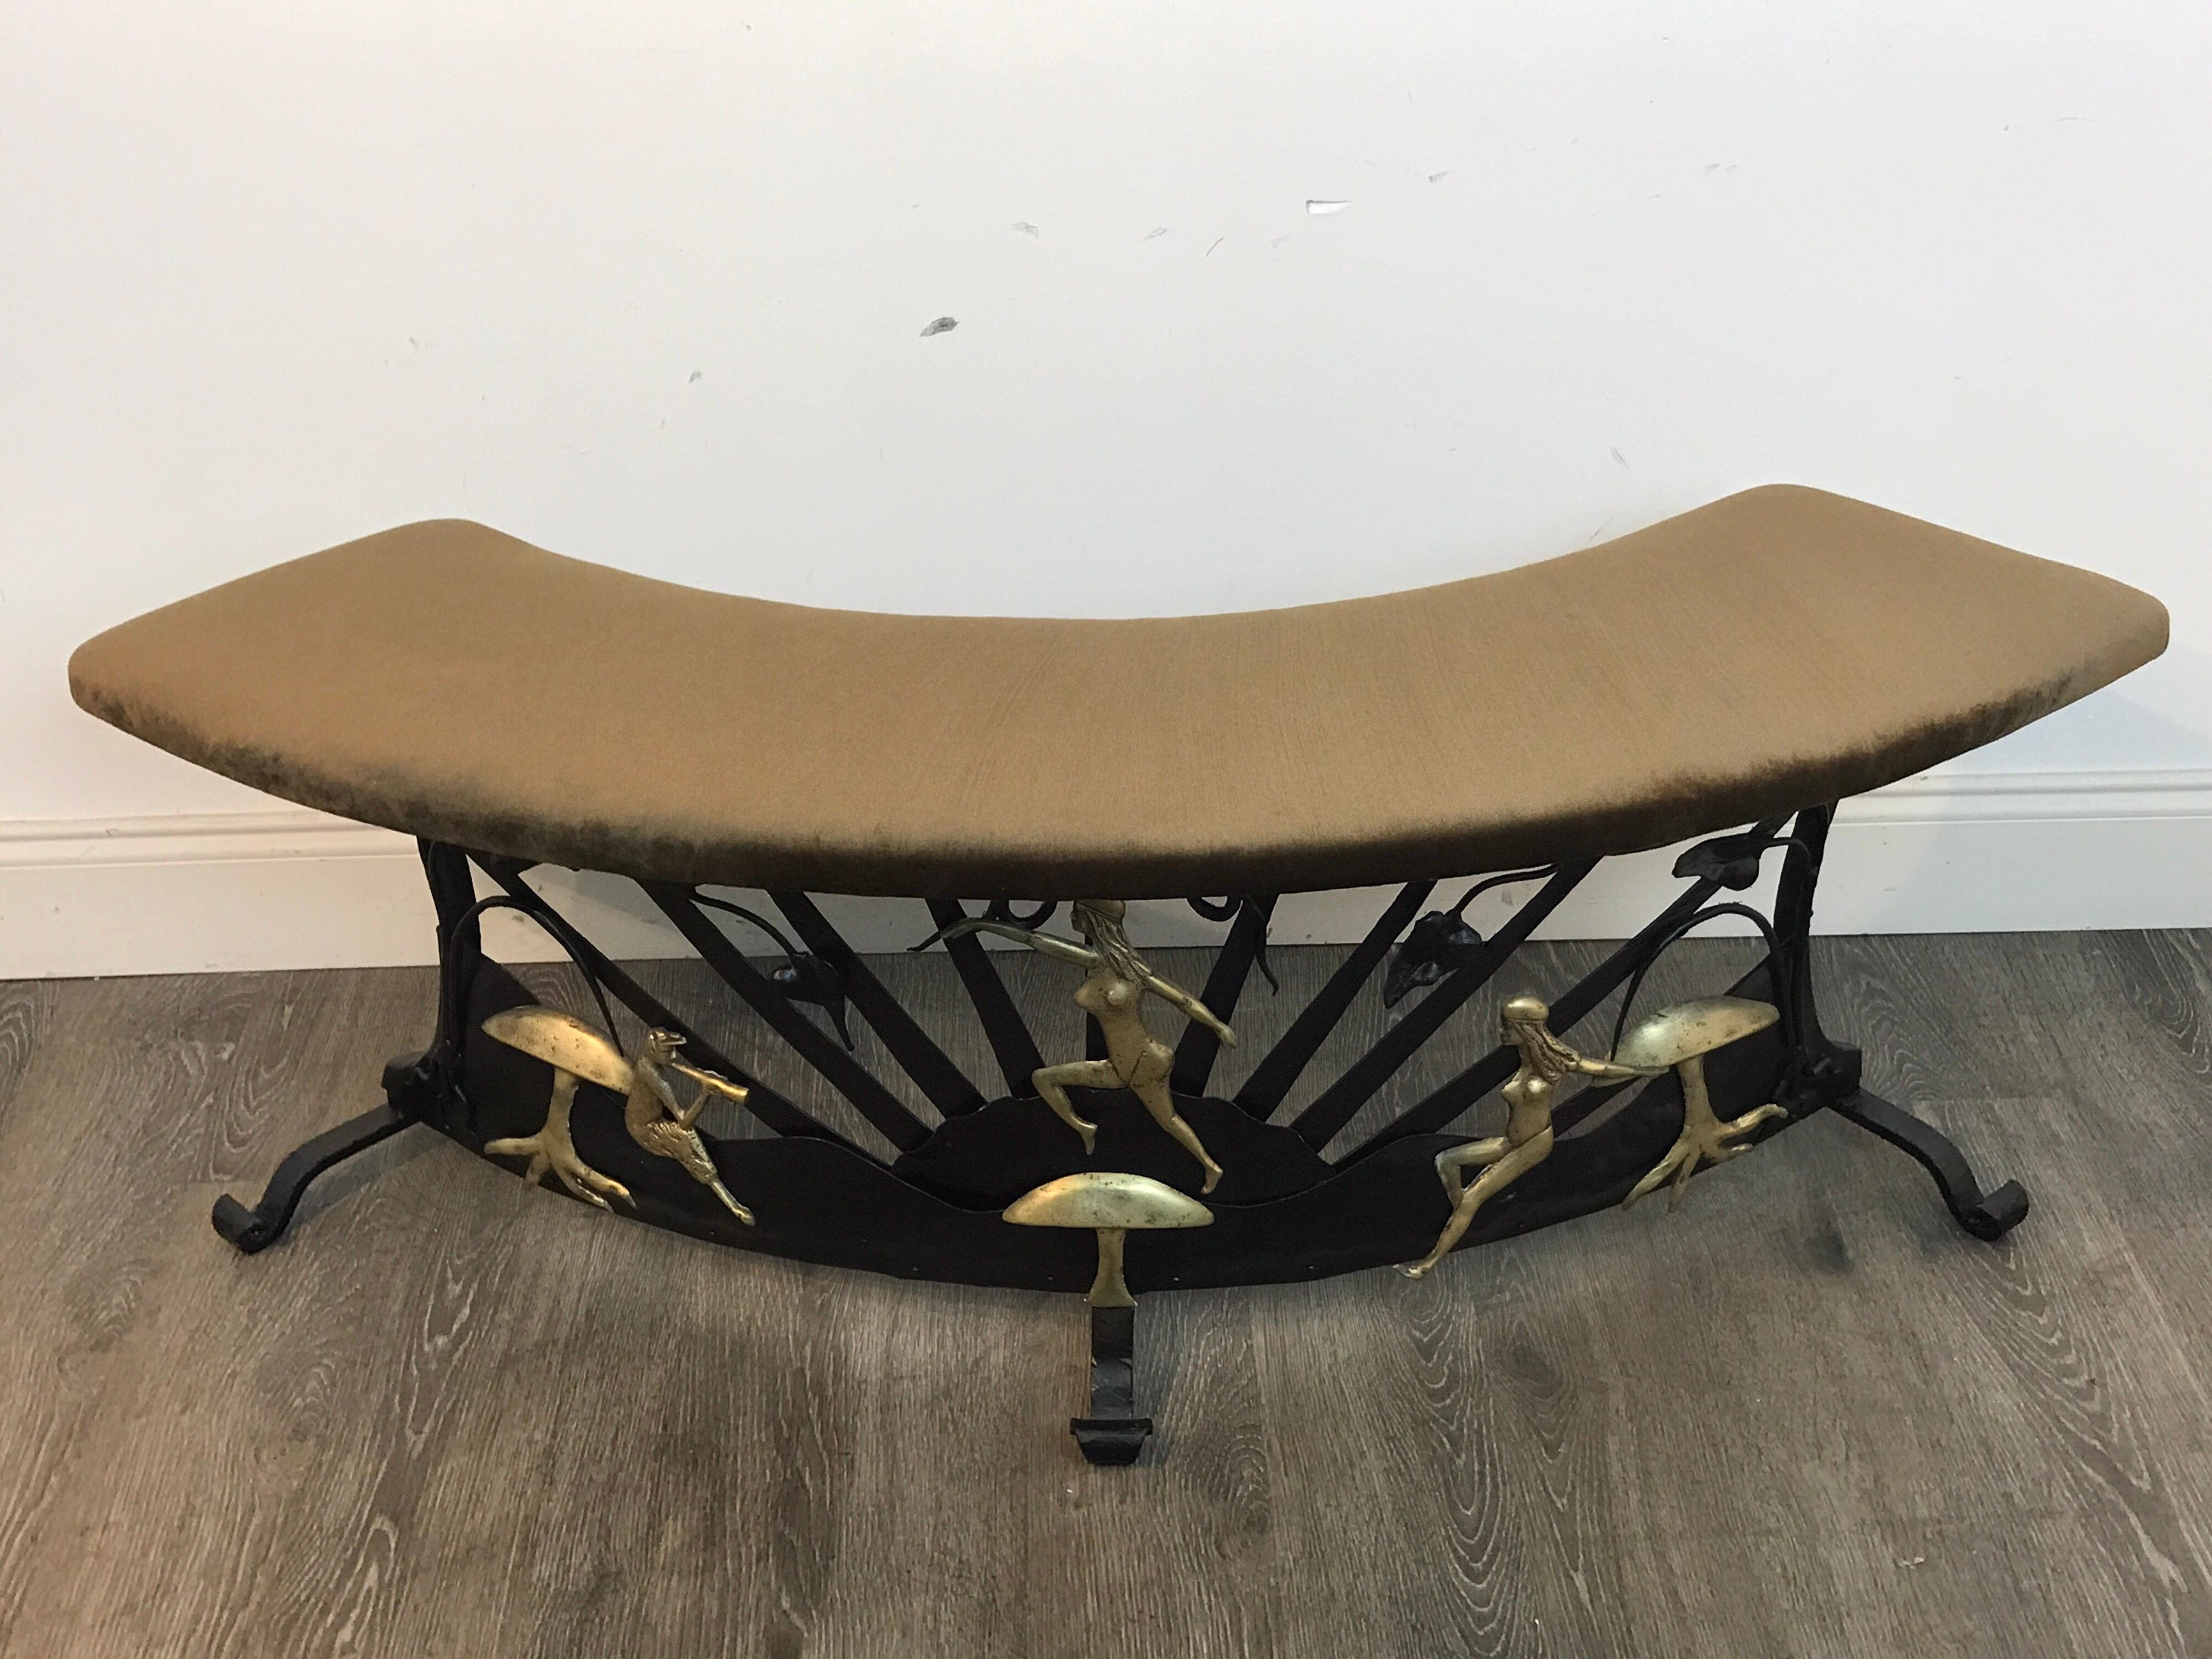 Art Deco wrought iron semi -circle fireside bench, enchanted garden motif, with a newly upholstered Kravet brown velvet top, raised on a base with brass mushrooms, satyrs and nudes in landscape, Could be used in front of a fireplace or any interior